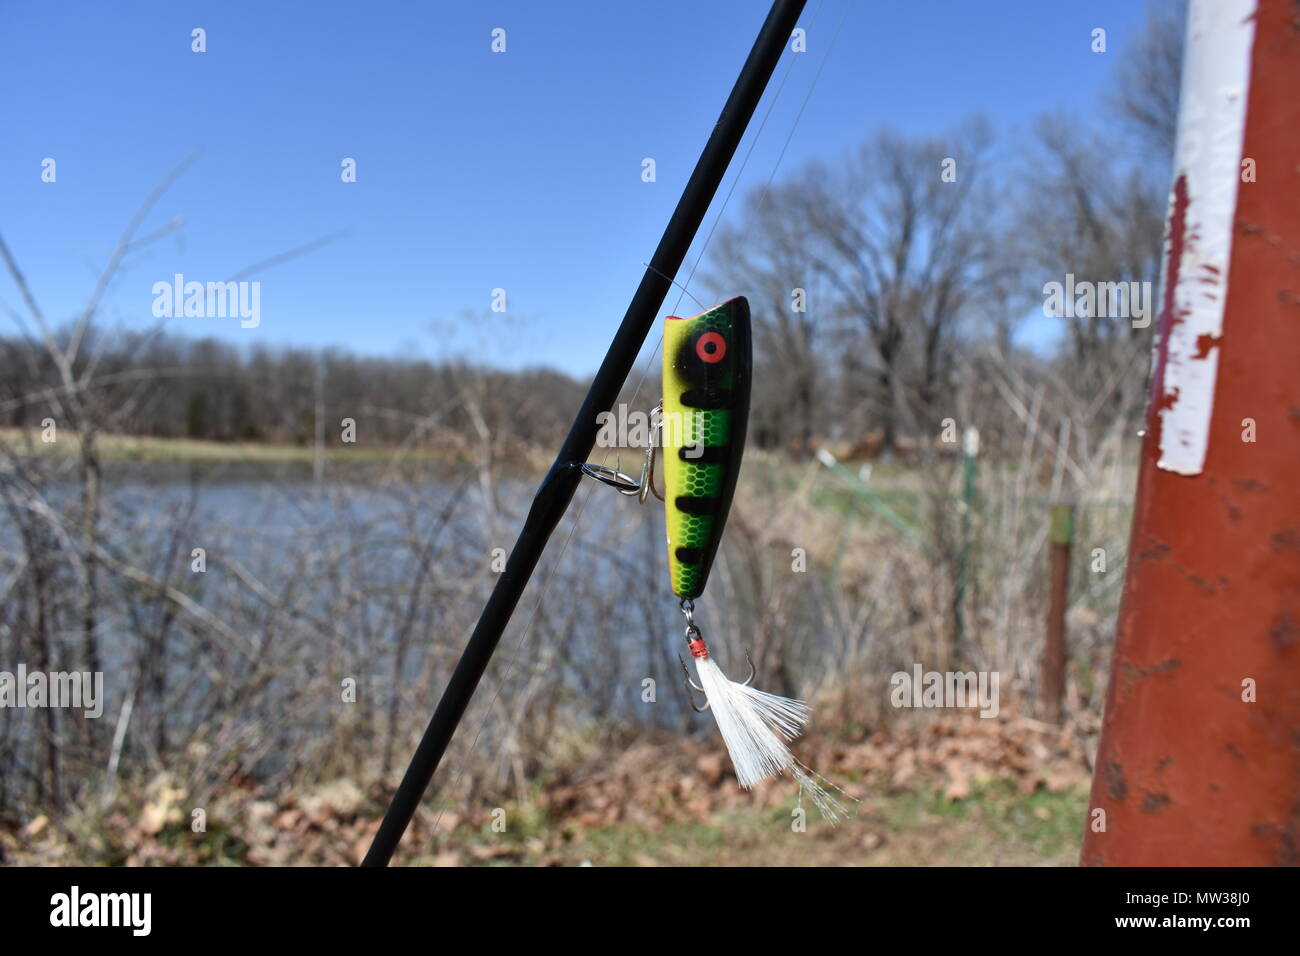 A close-up of a bass lure dangling from a fishing pole and a farm pond in the background calls to the fisherman. Missouri, MO, United States, US, USA Stock Photo